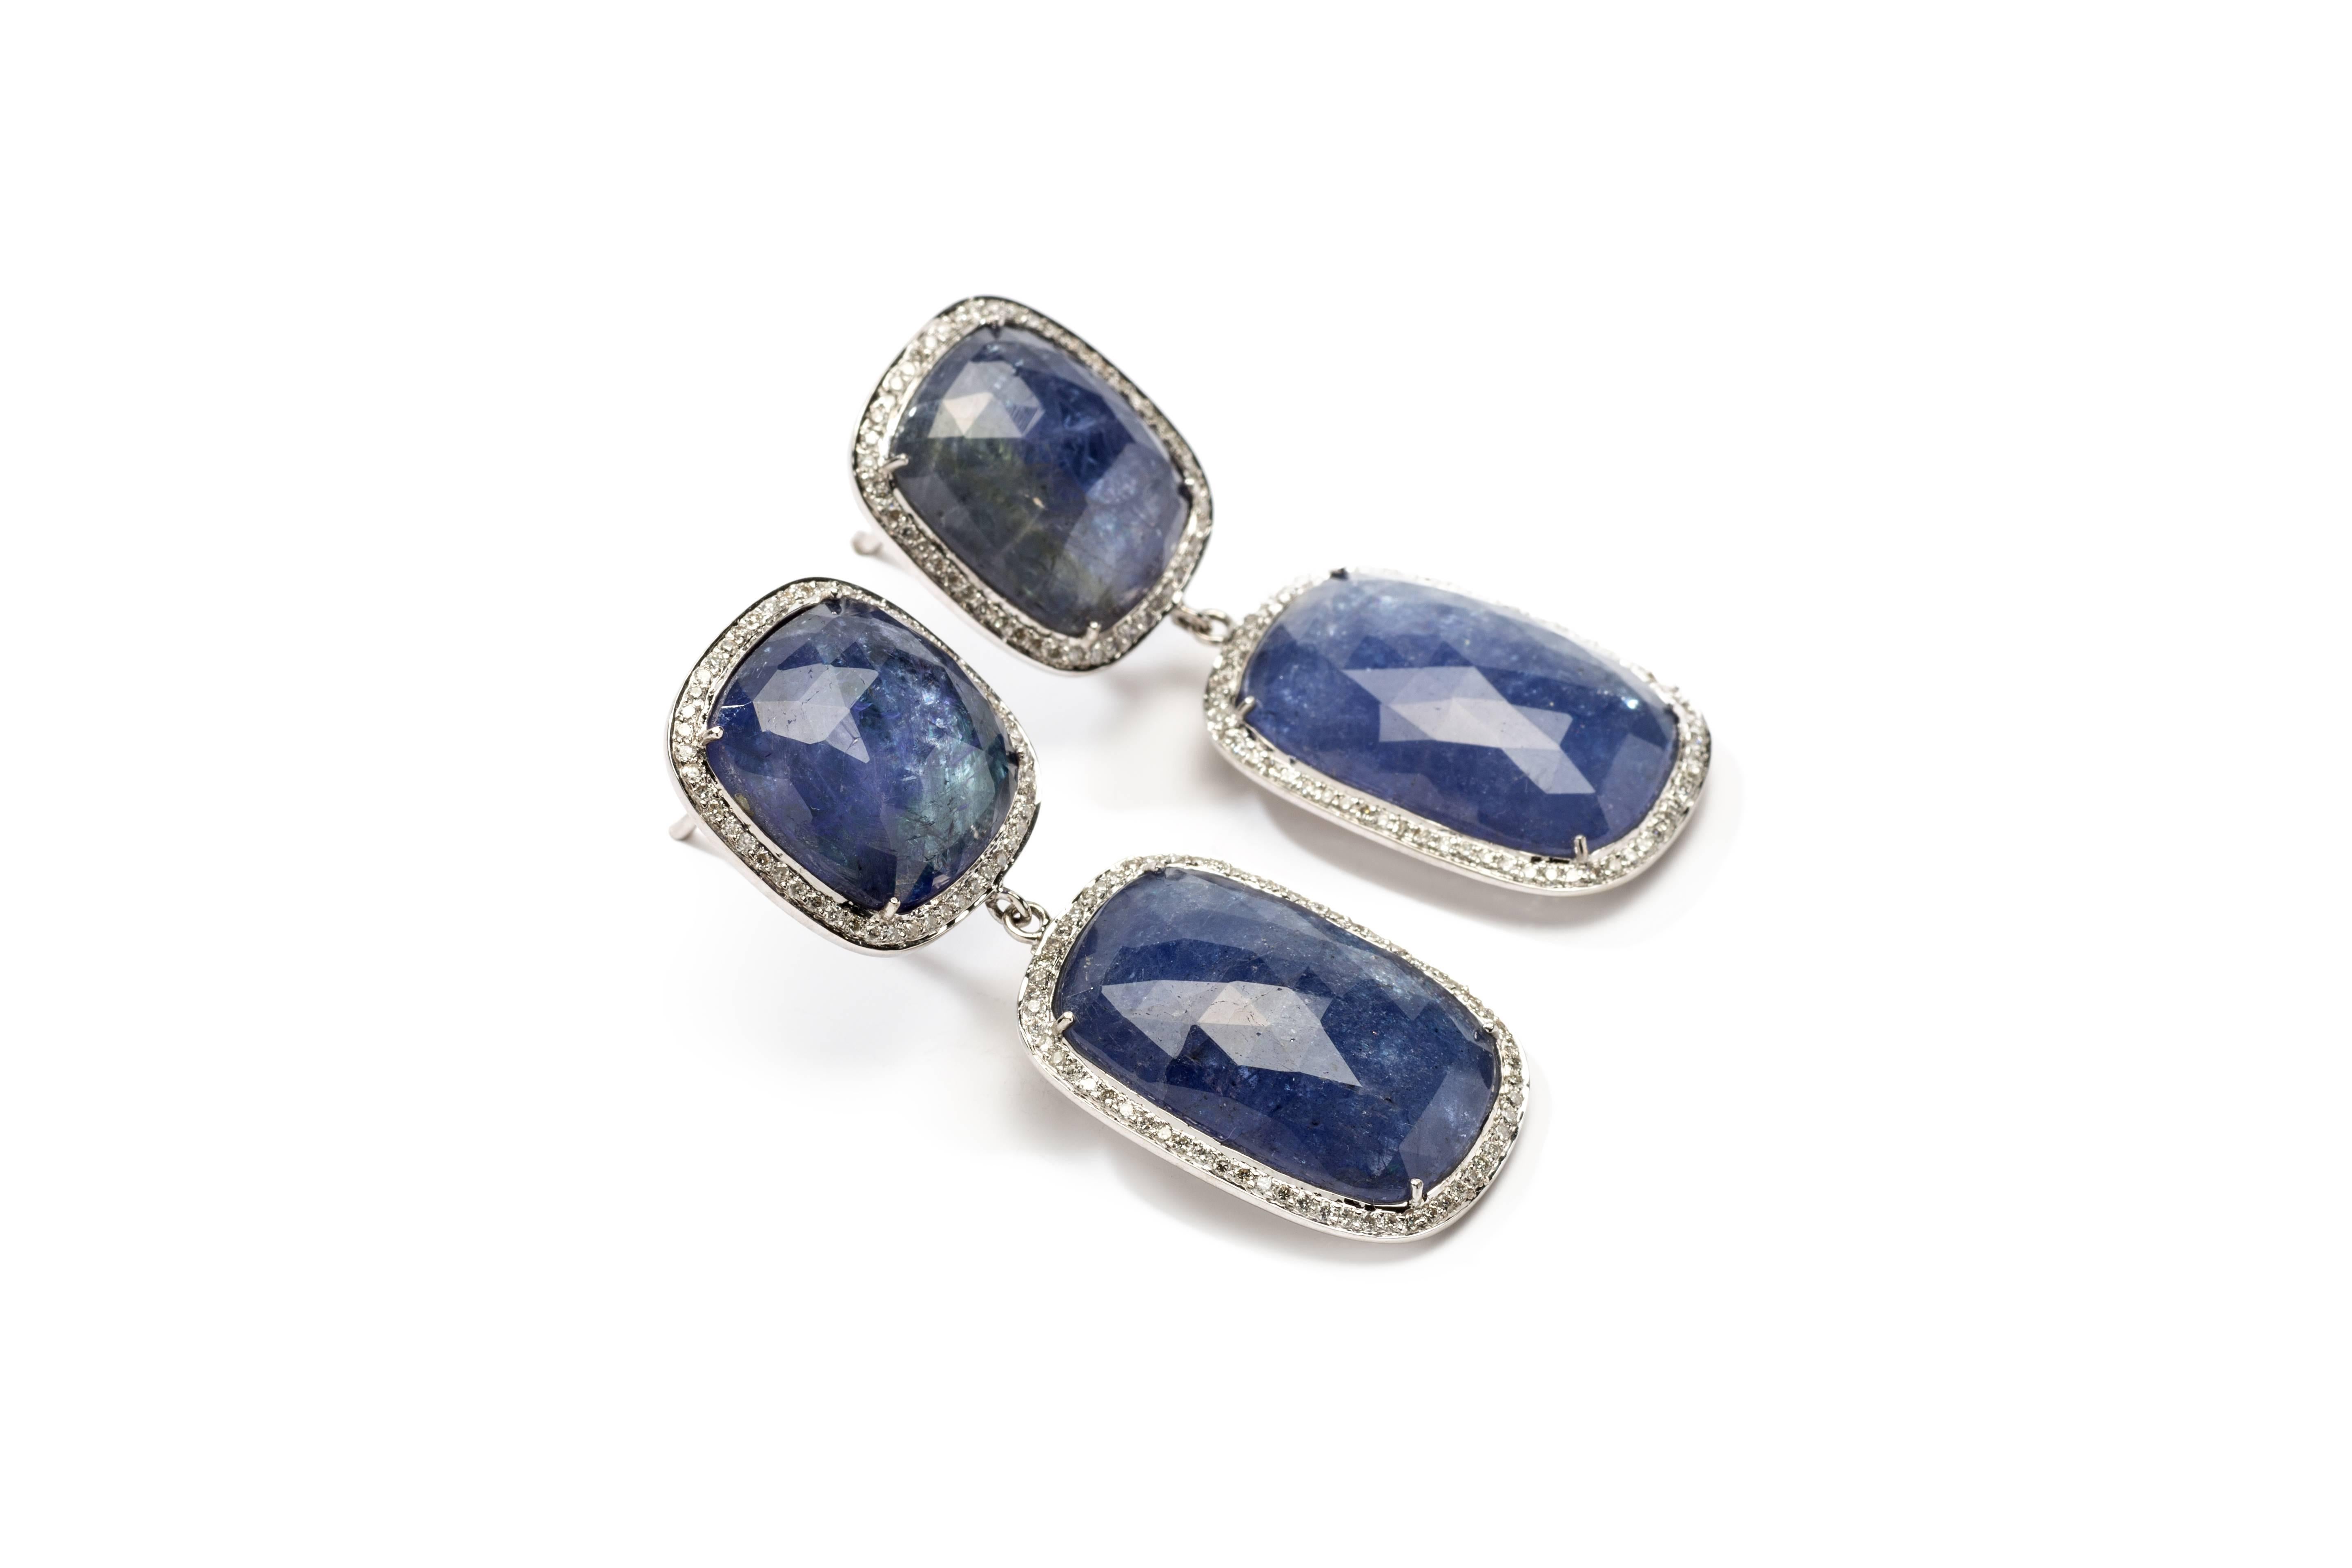 Europe, 2nd half of the 20th century. Pair of two-piece earrings, with 4 faceted tanzanite weighing circa 42,72 ct. and 226 brilliant-cut diamonds with a total weight of circa 0,88 ct. Mounted in 18K white gold. Marked with 750. 
Dimensions: 1.89 x